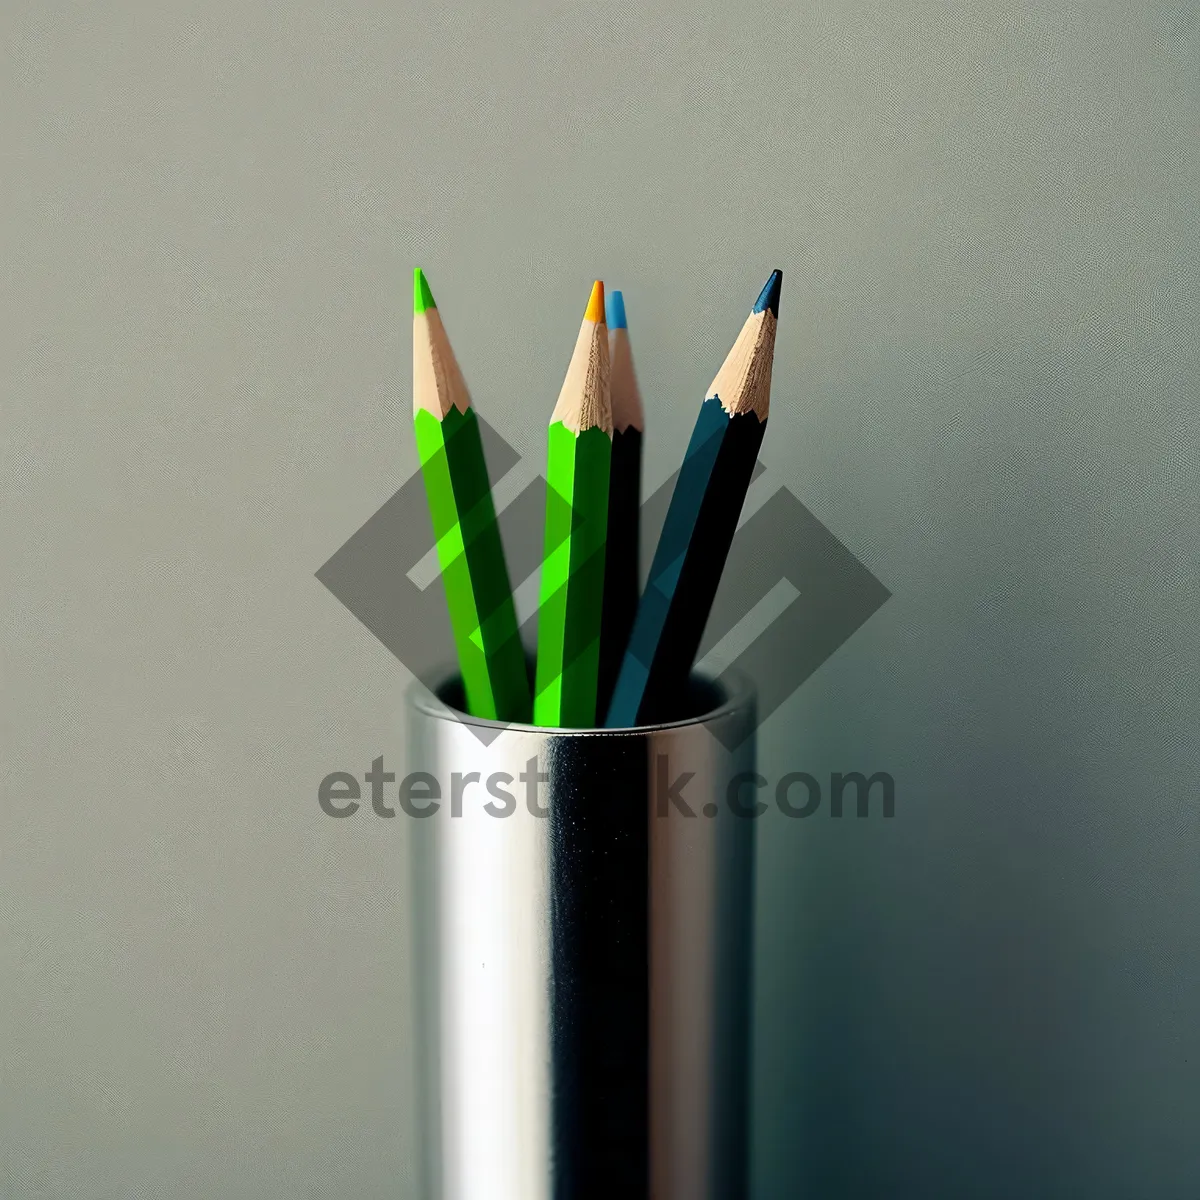 Picture of Vibrant Art Supplies on Wooden Desk